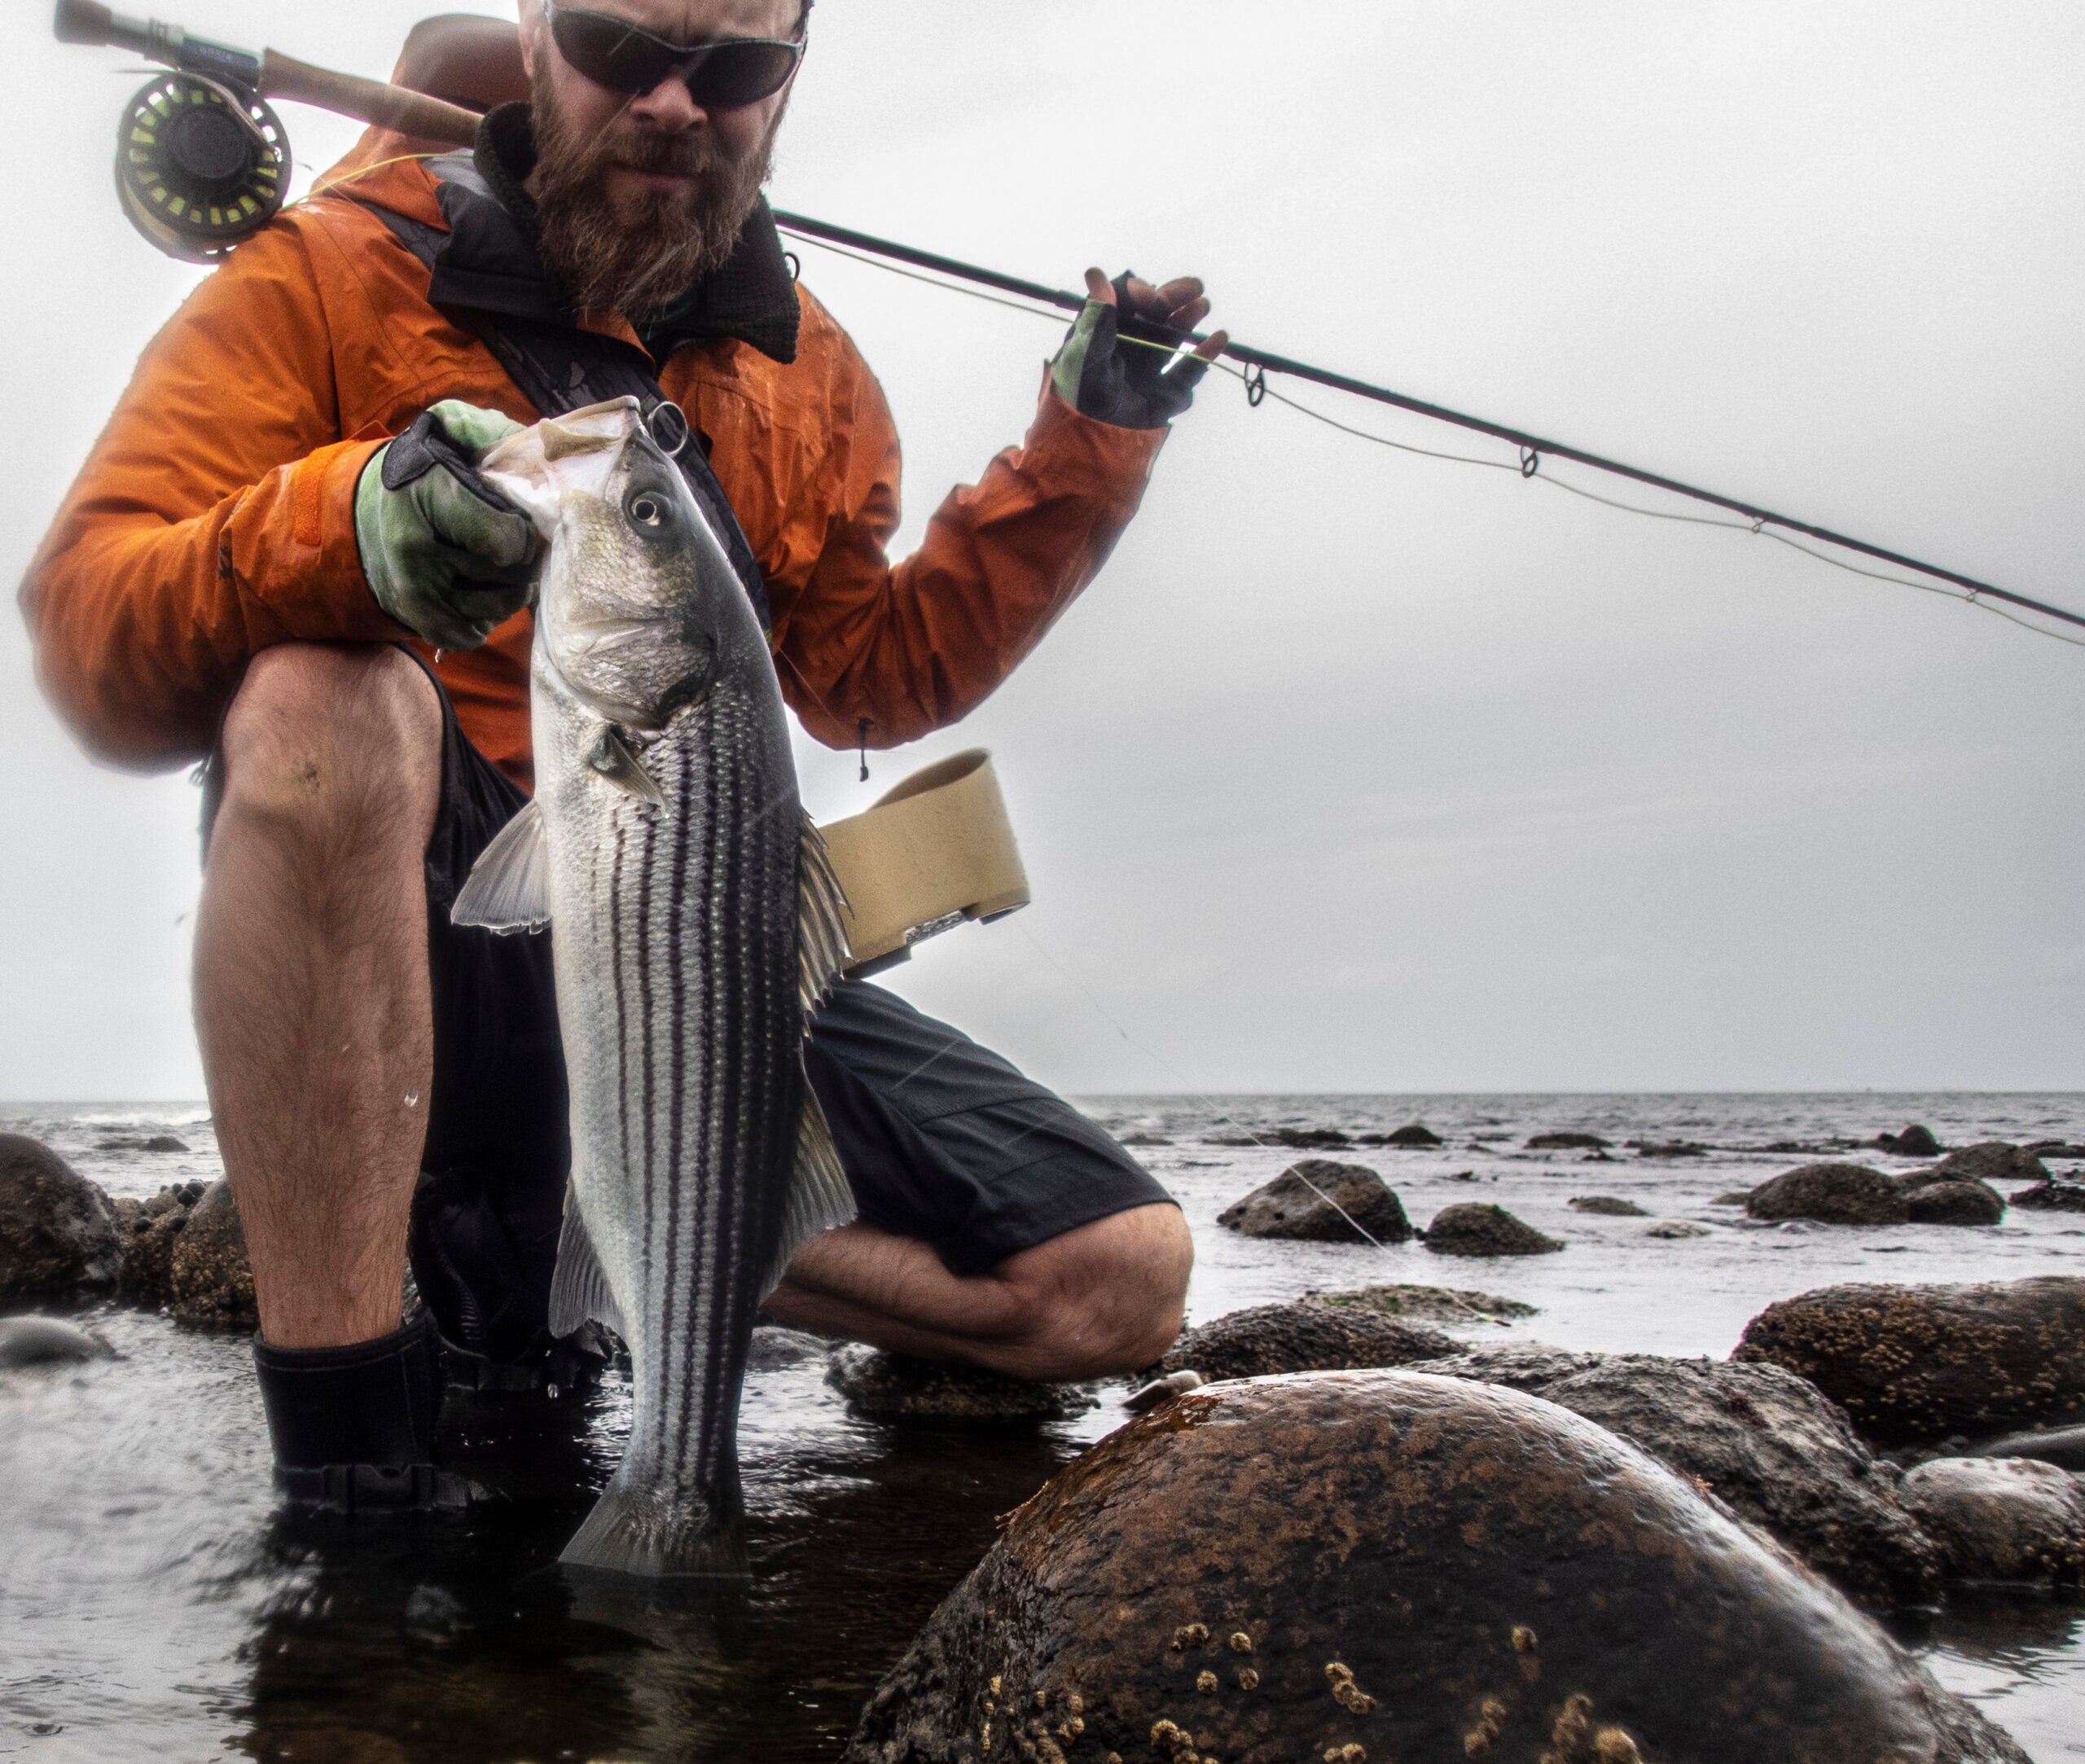 Beginners Guide to Fly Fishing For Striped Bass